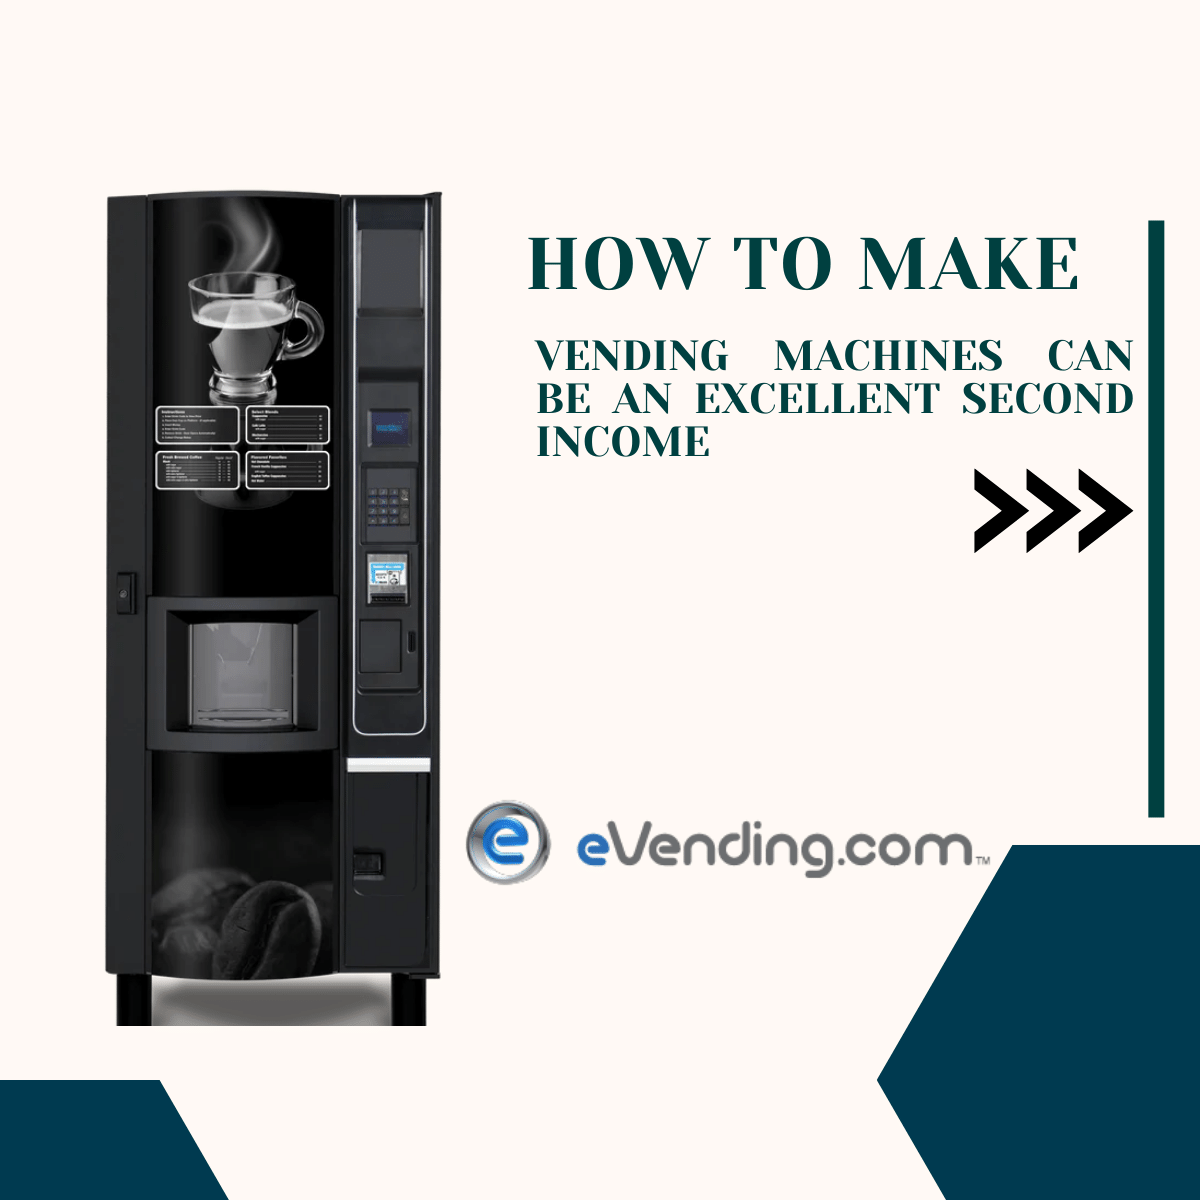 SNACK VENDING MACHINES CAN BE AN EXCELLENT SECOND INCOME